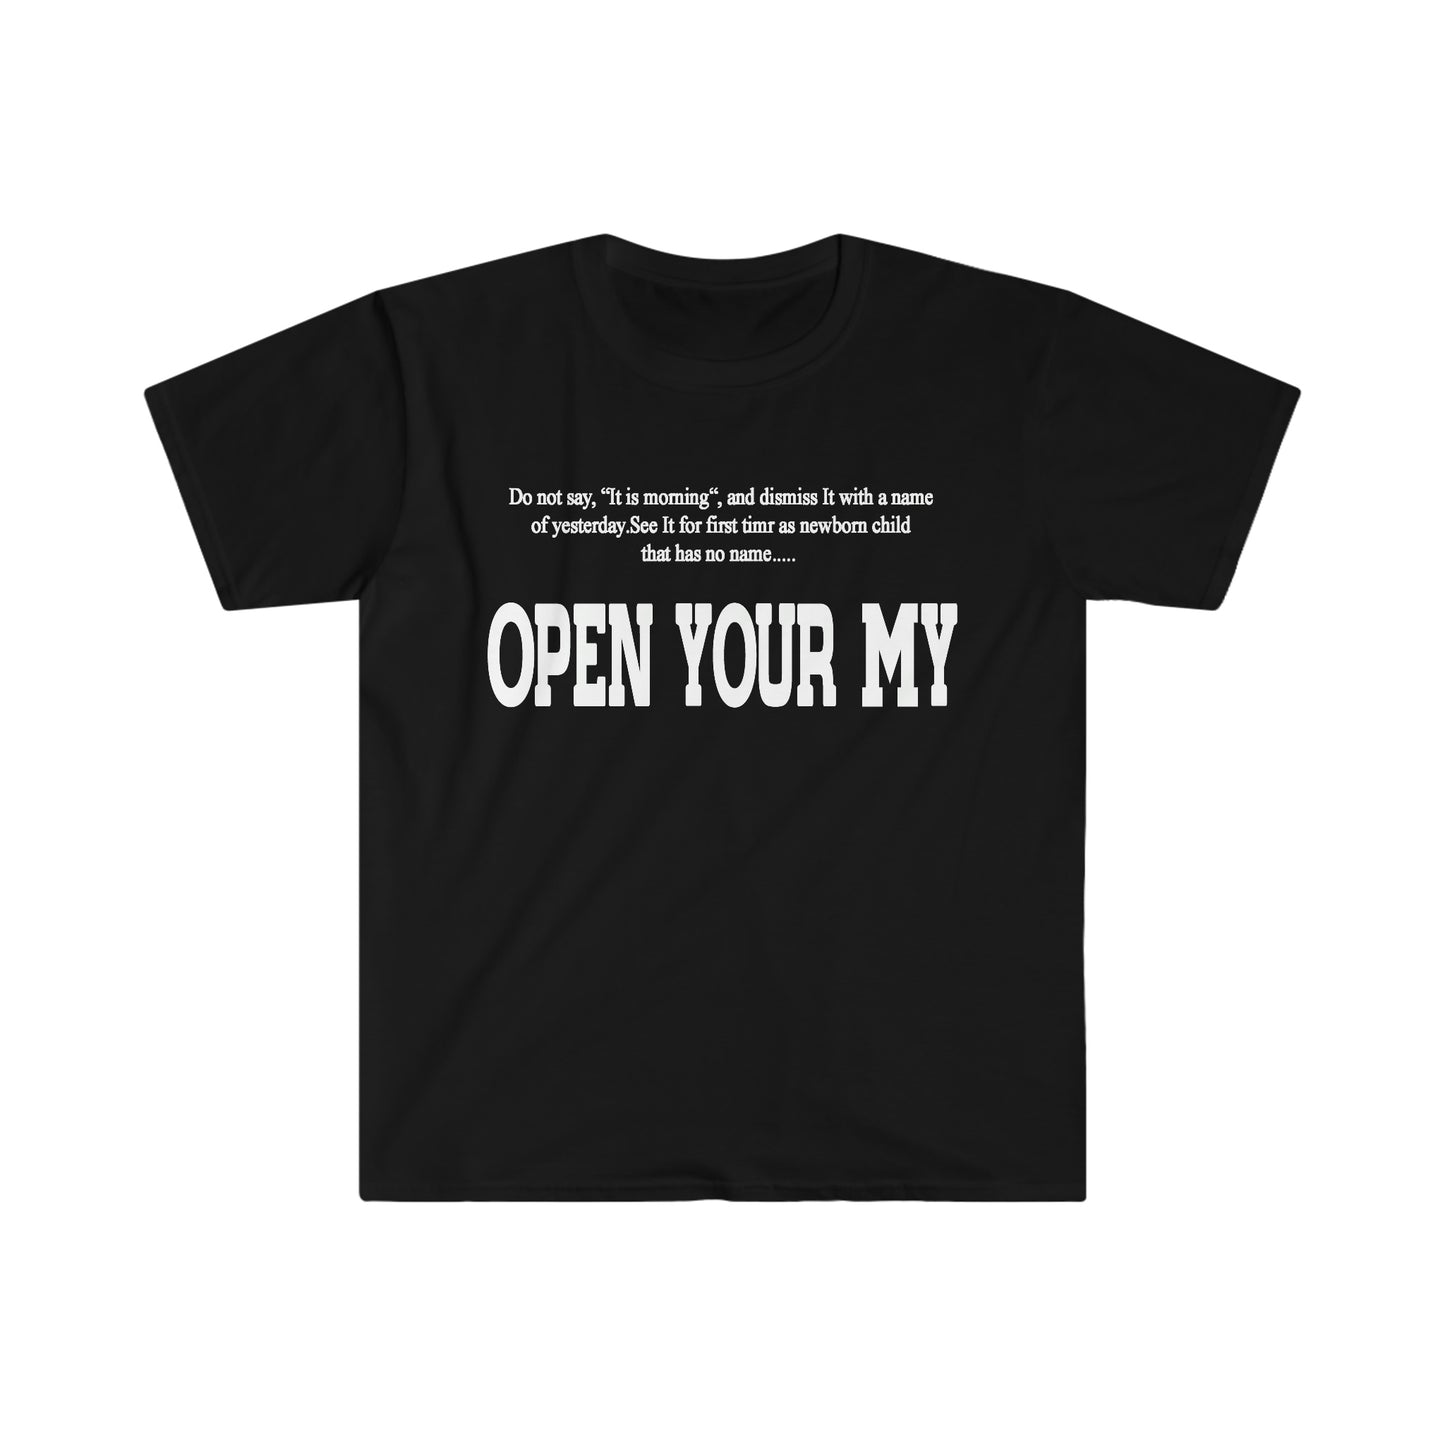 Open Your My.